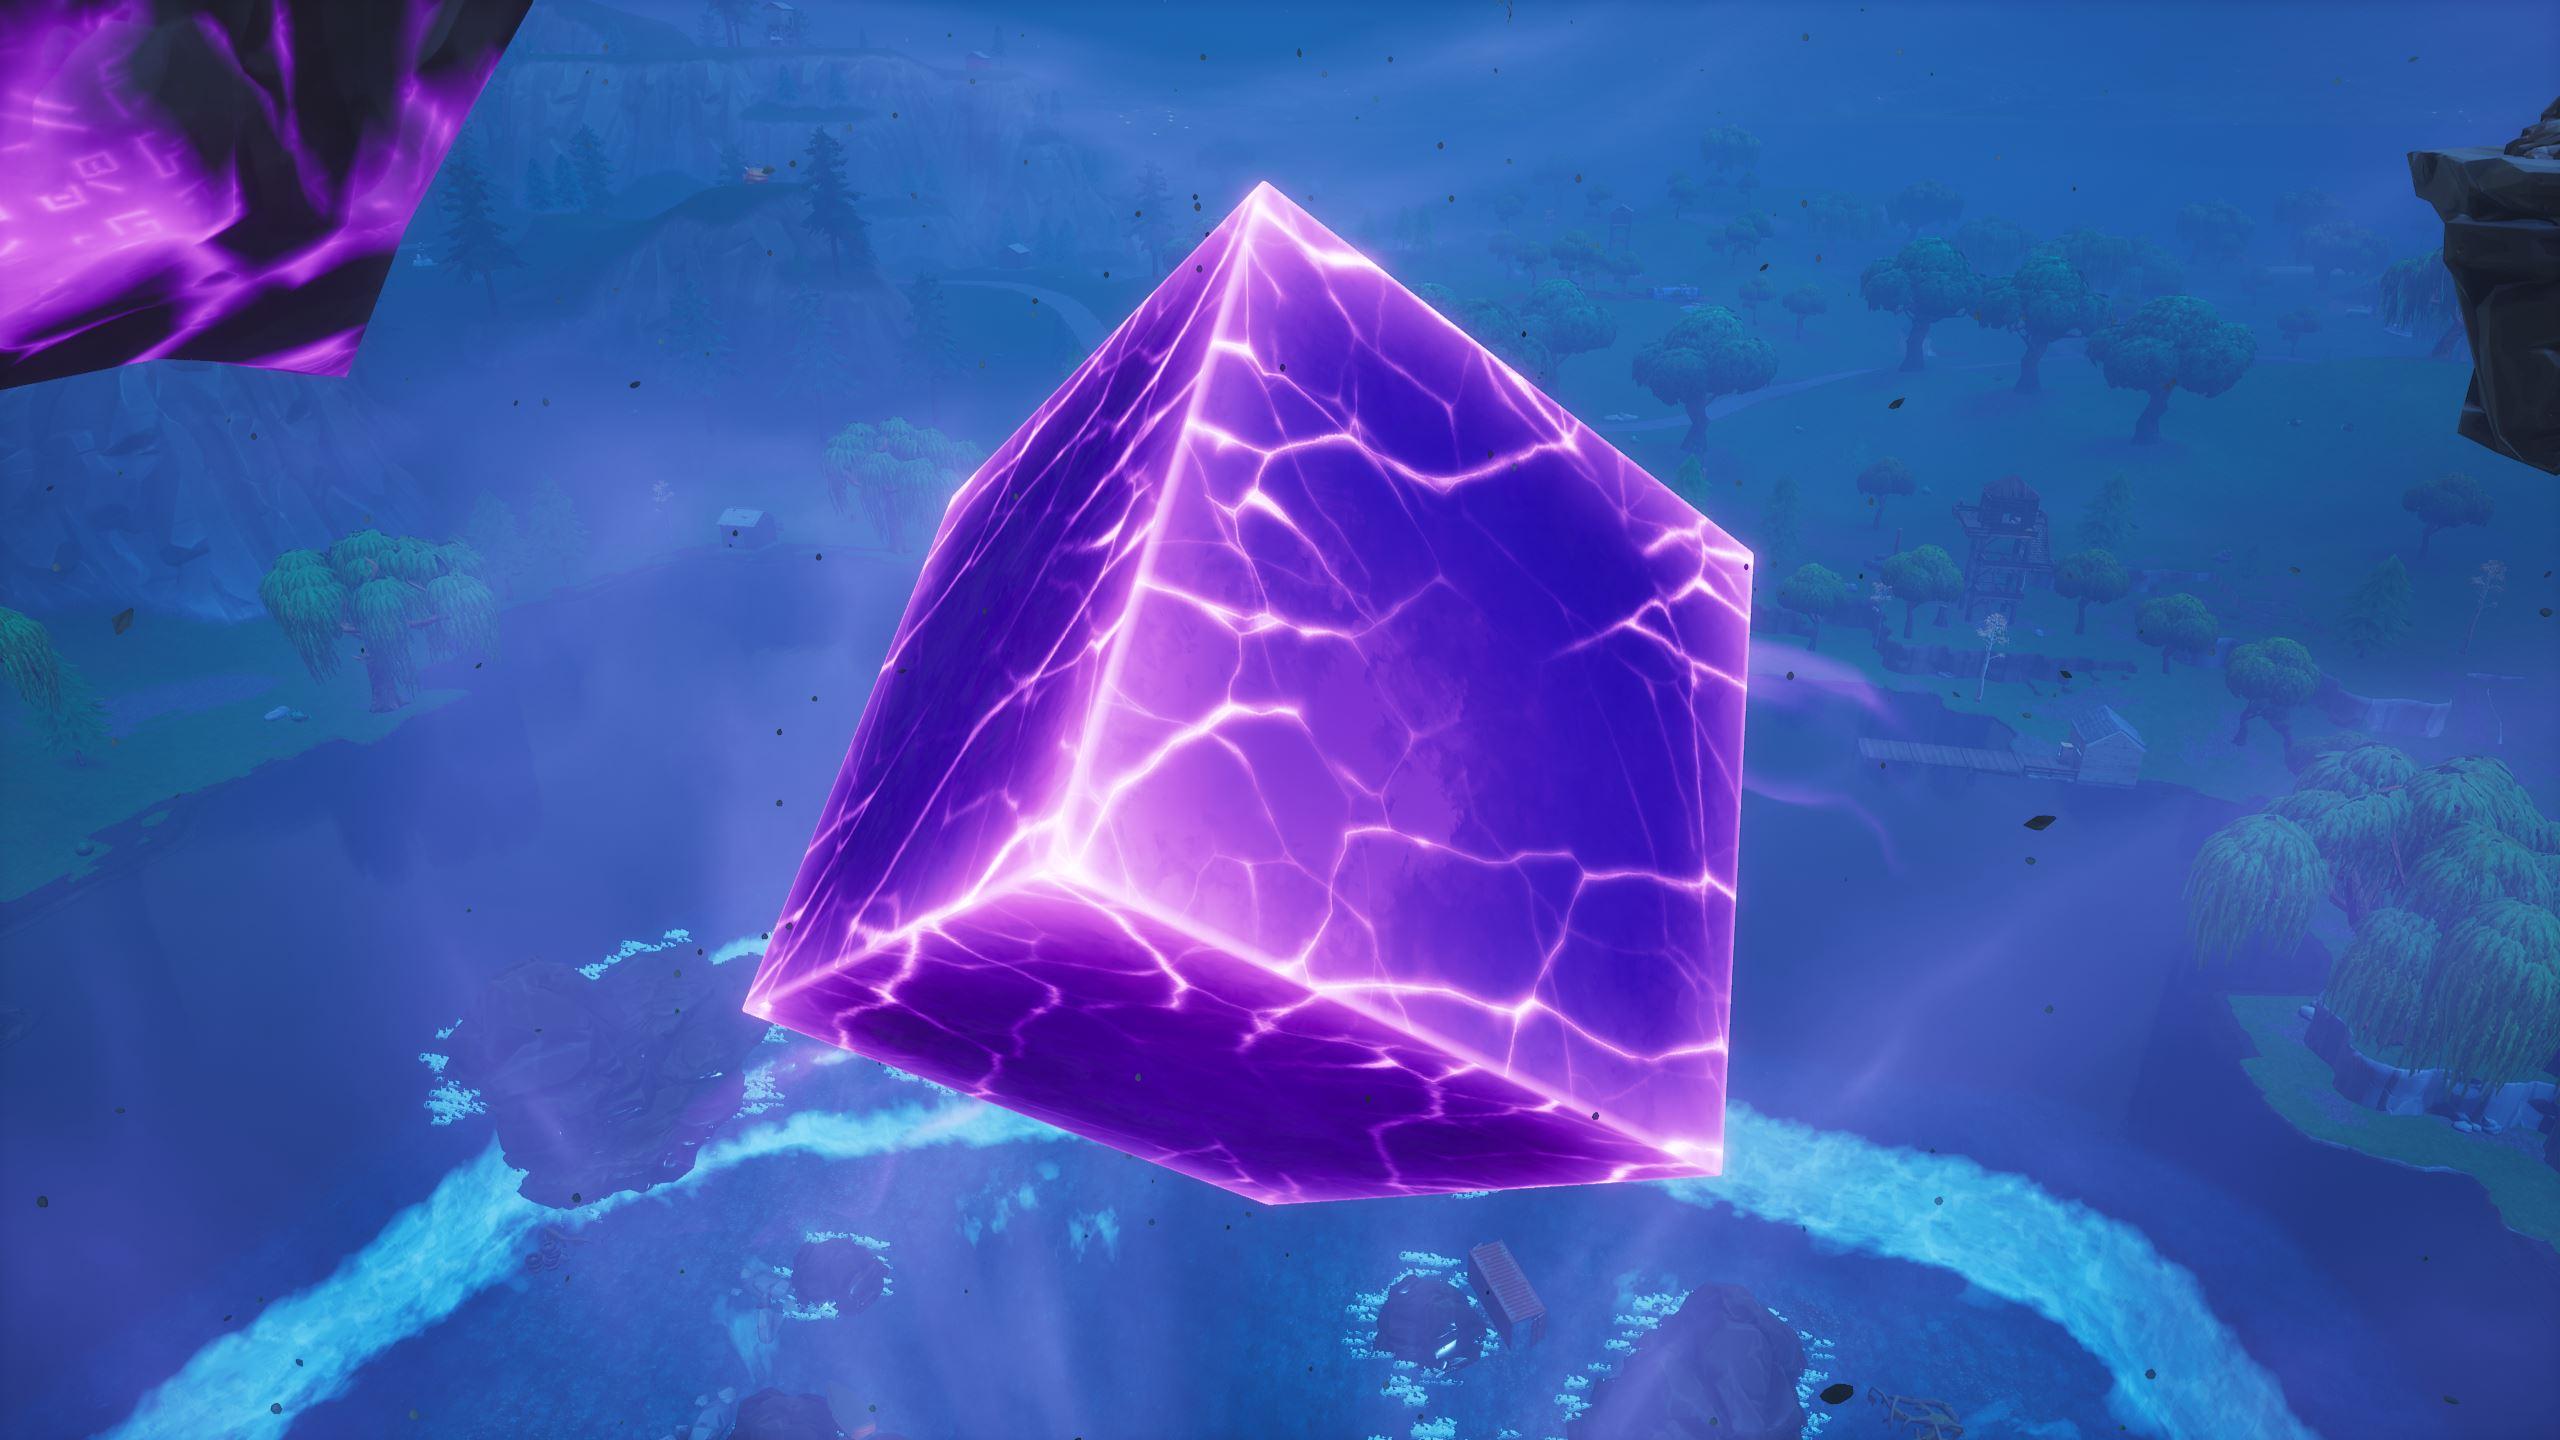 Kevin The Cube Wallpapers - Wallpaper Cave